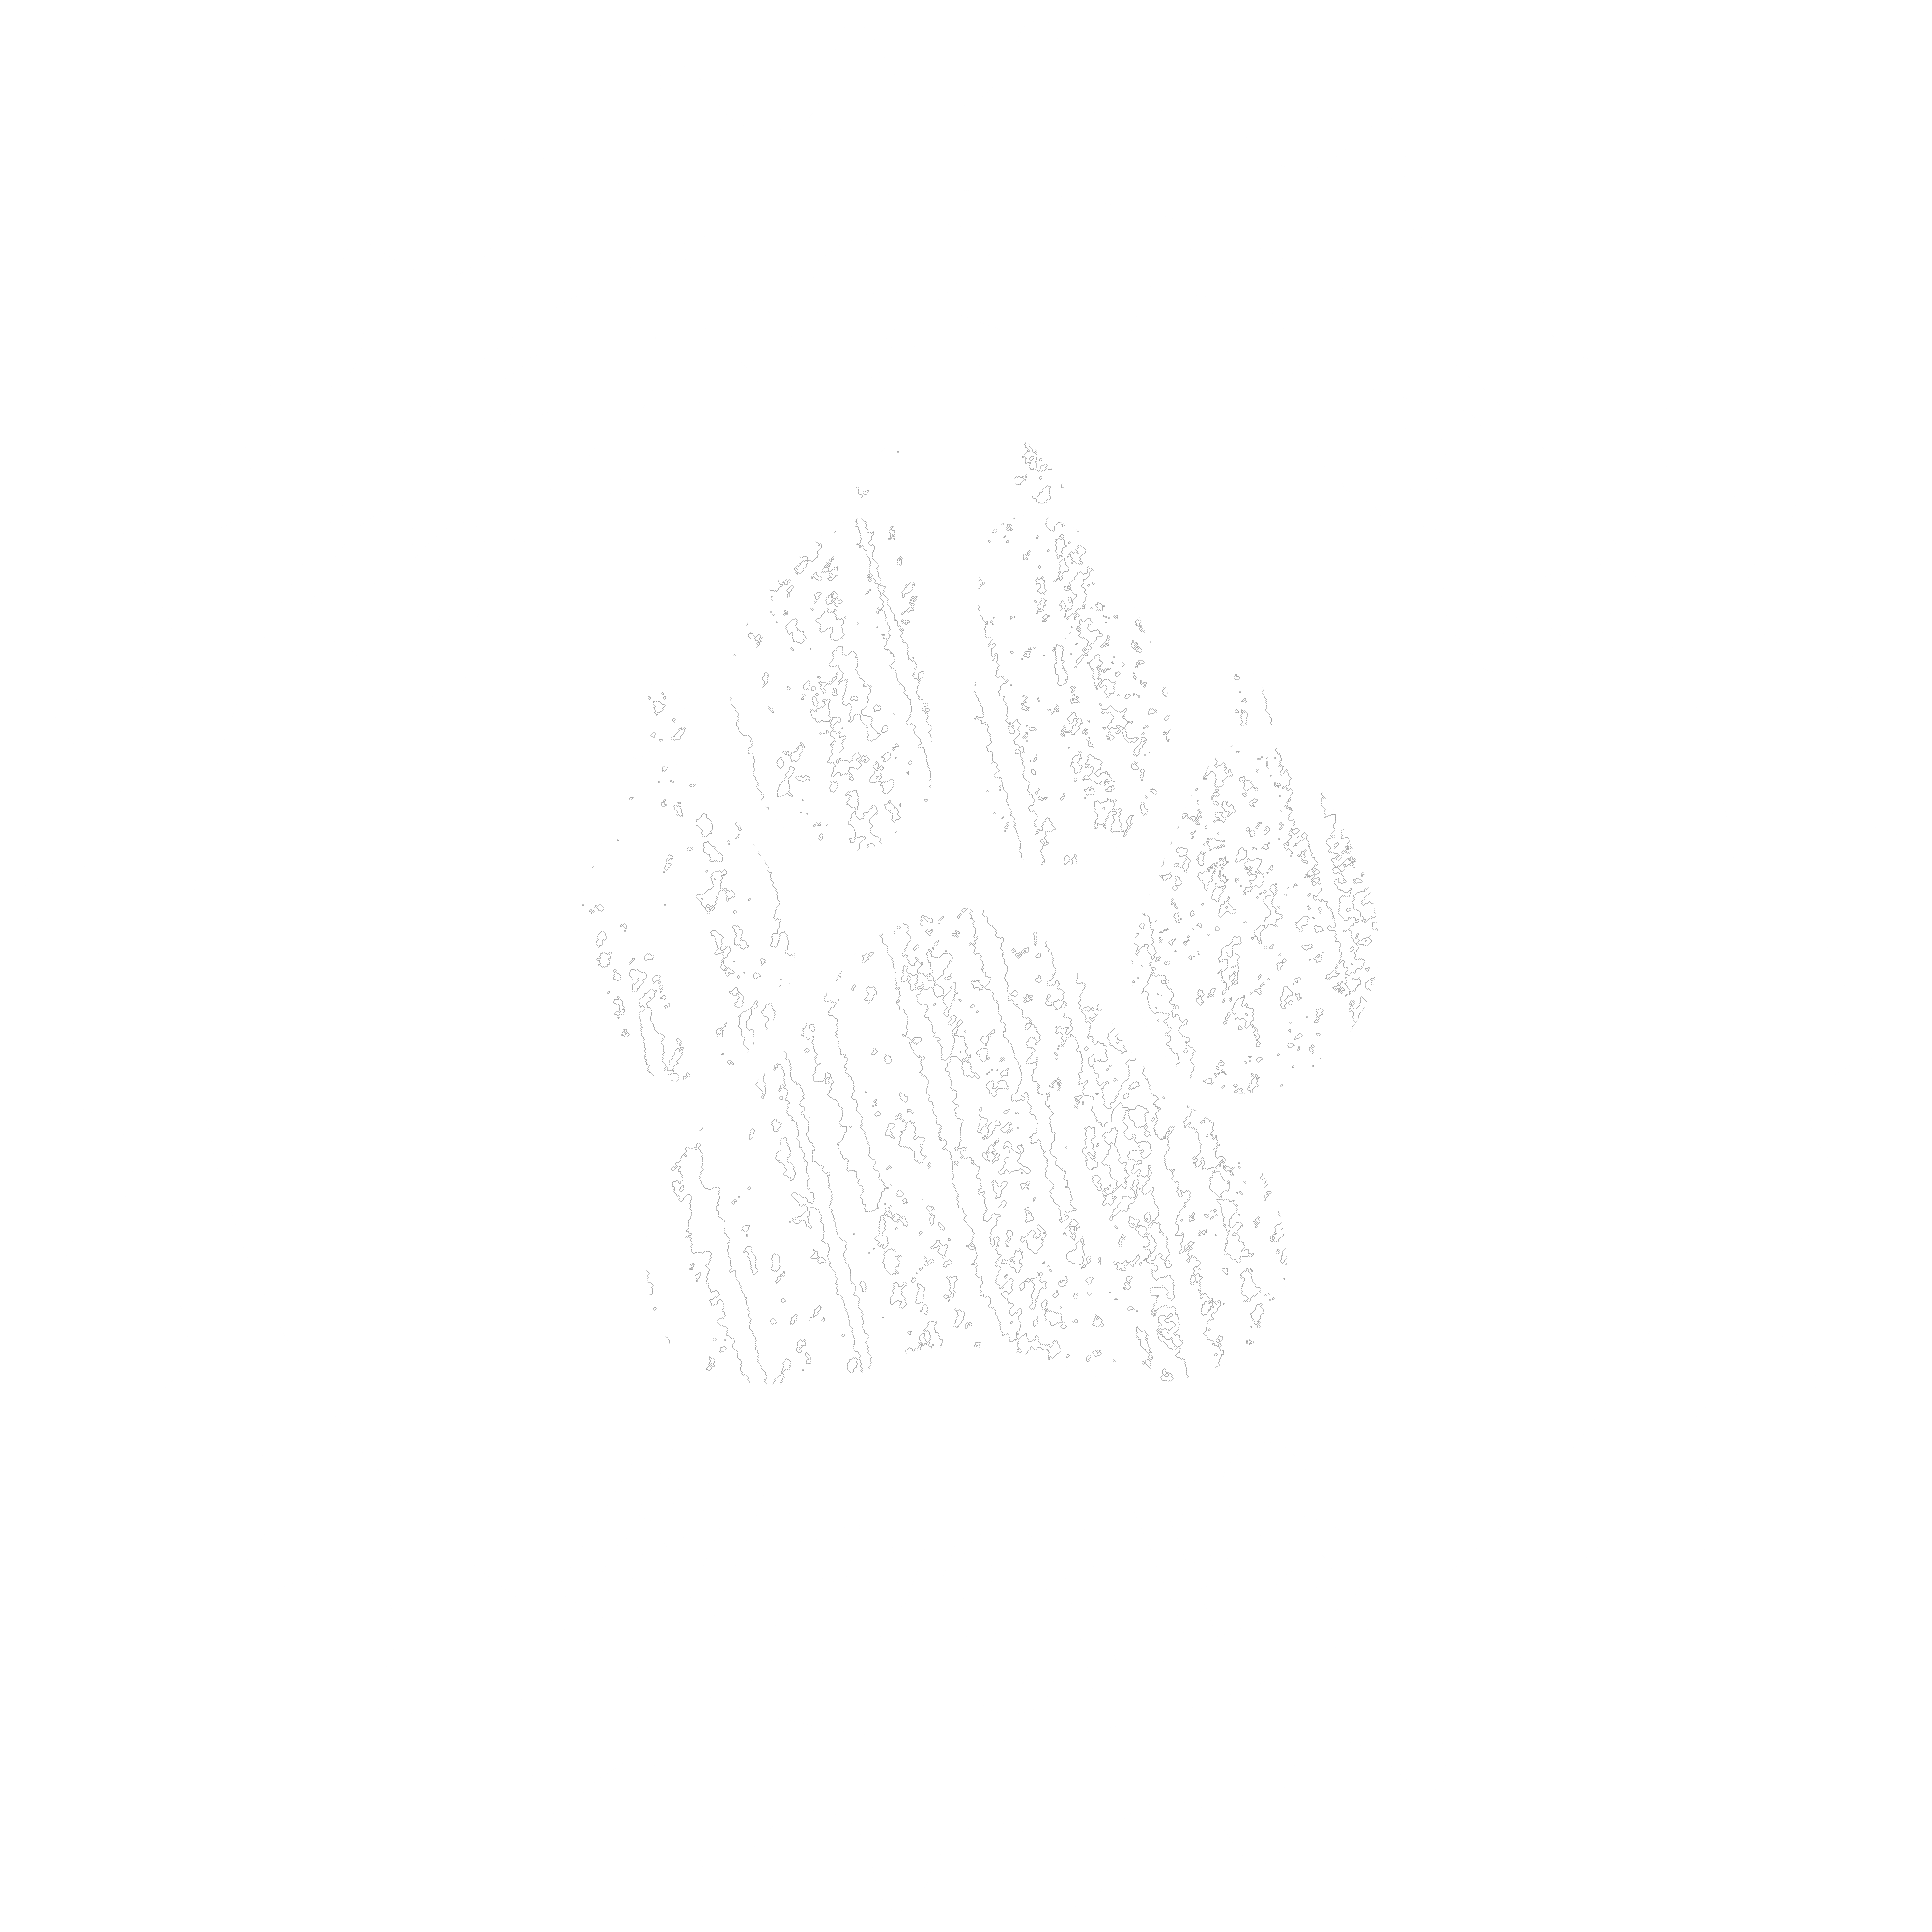 Chainring Logo - Bear Dog Bicycles. A Locally Owned Bike Shop In Pittsburgh, PA